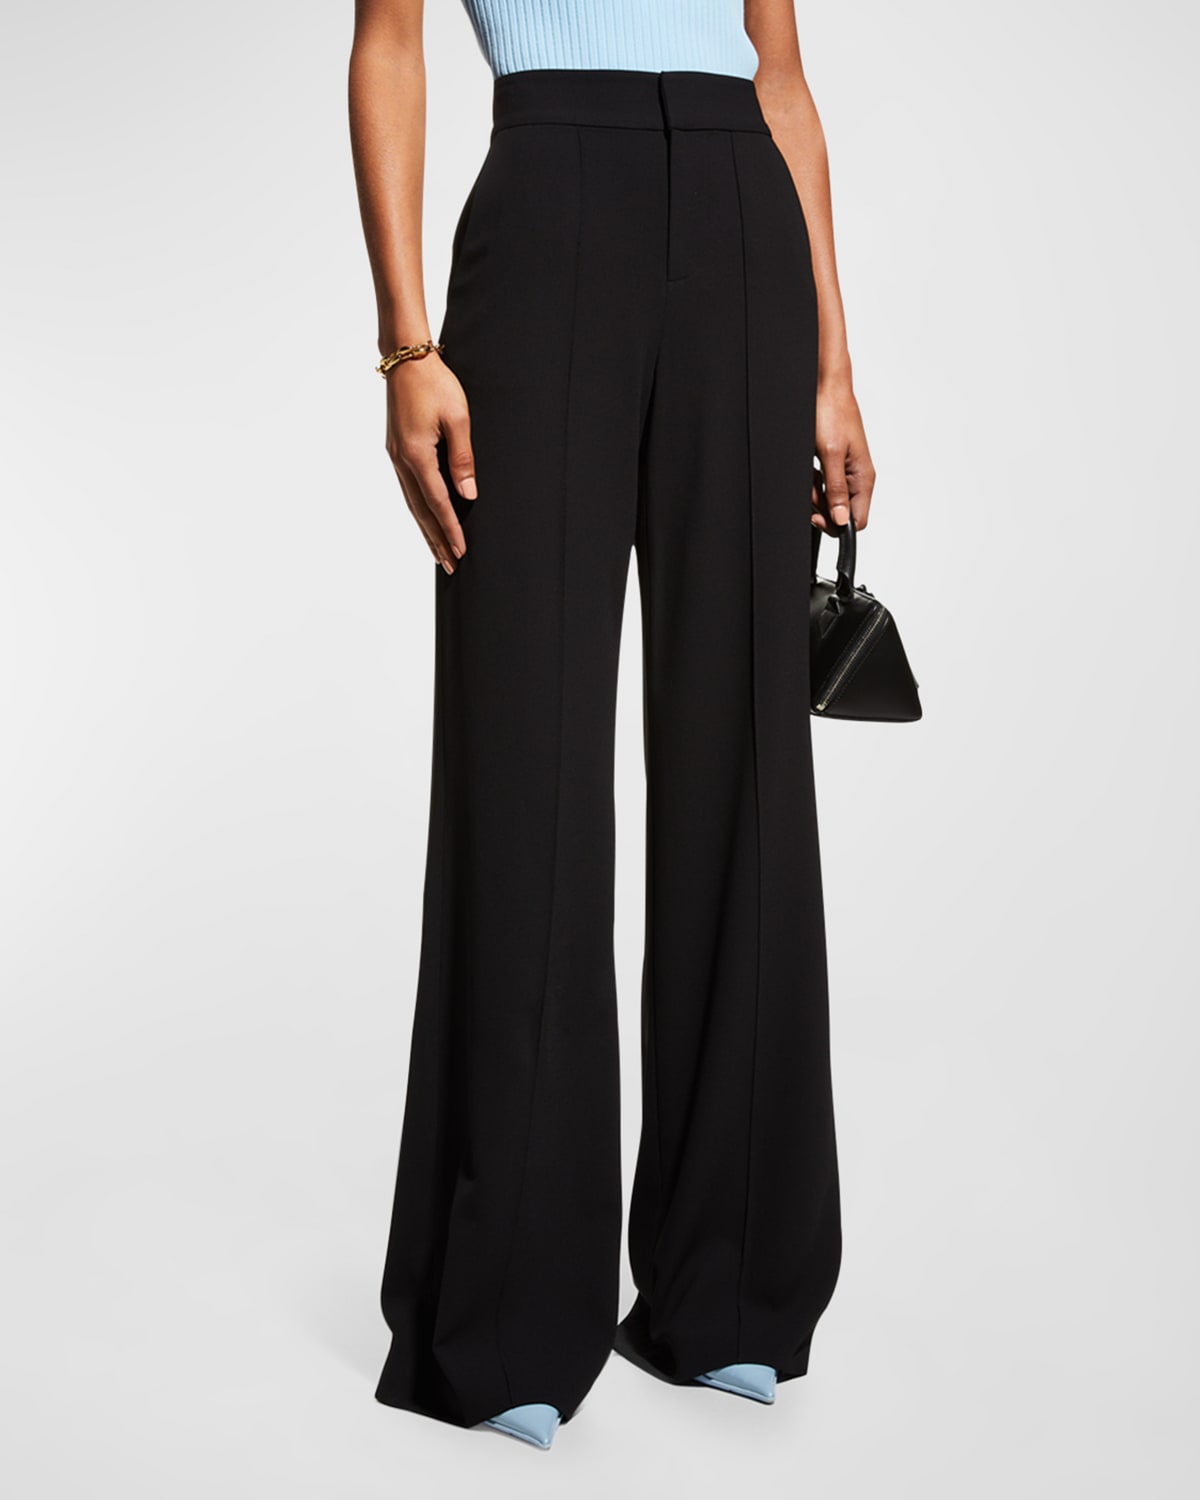 Alice + Olivia Dylan High-Waist Faux-Leather Pants | Neiman Marcus